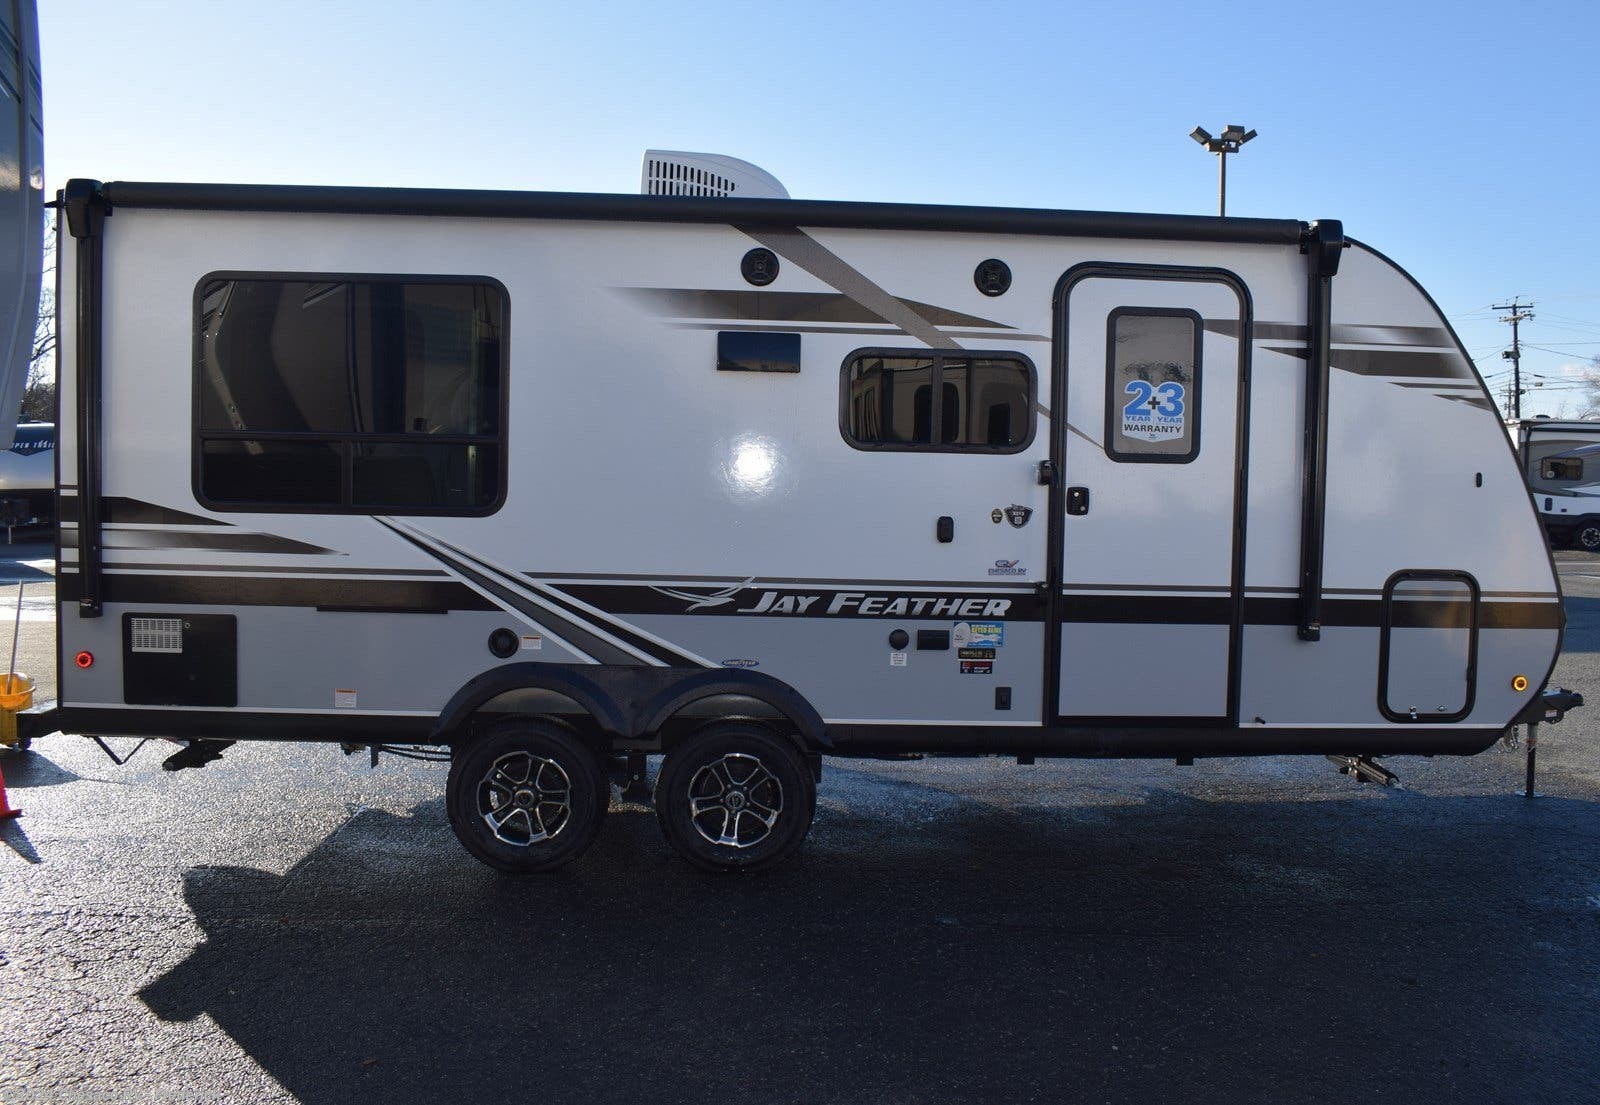 2020 Jayco Jay Feather X213 RV for Sale in Frederick, MD ...